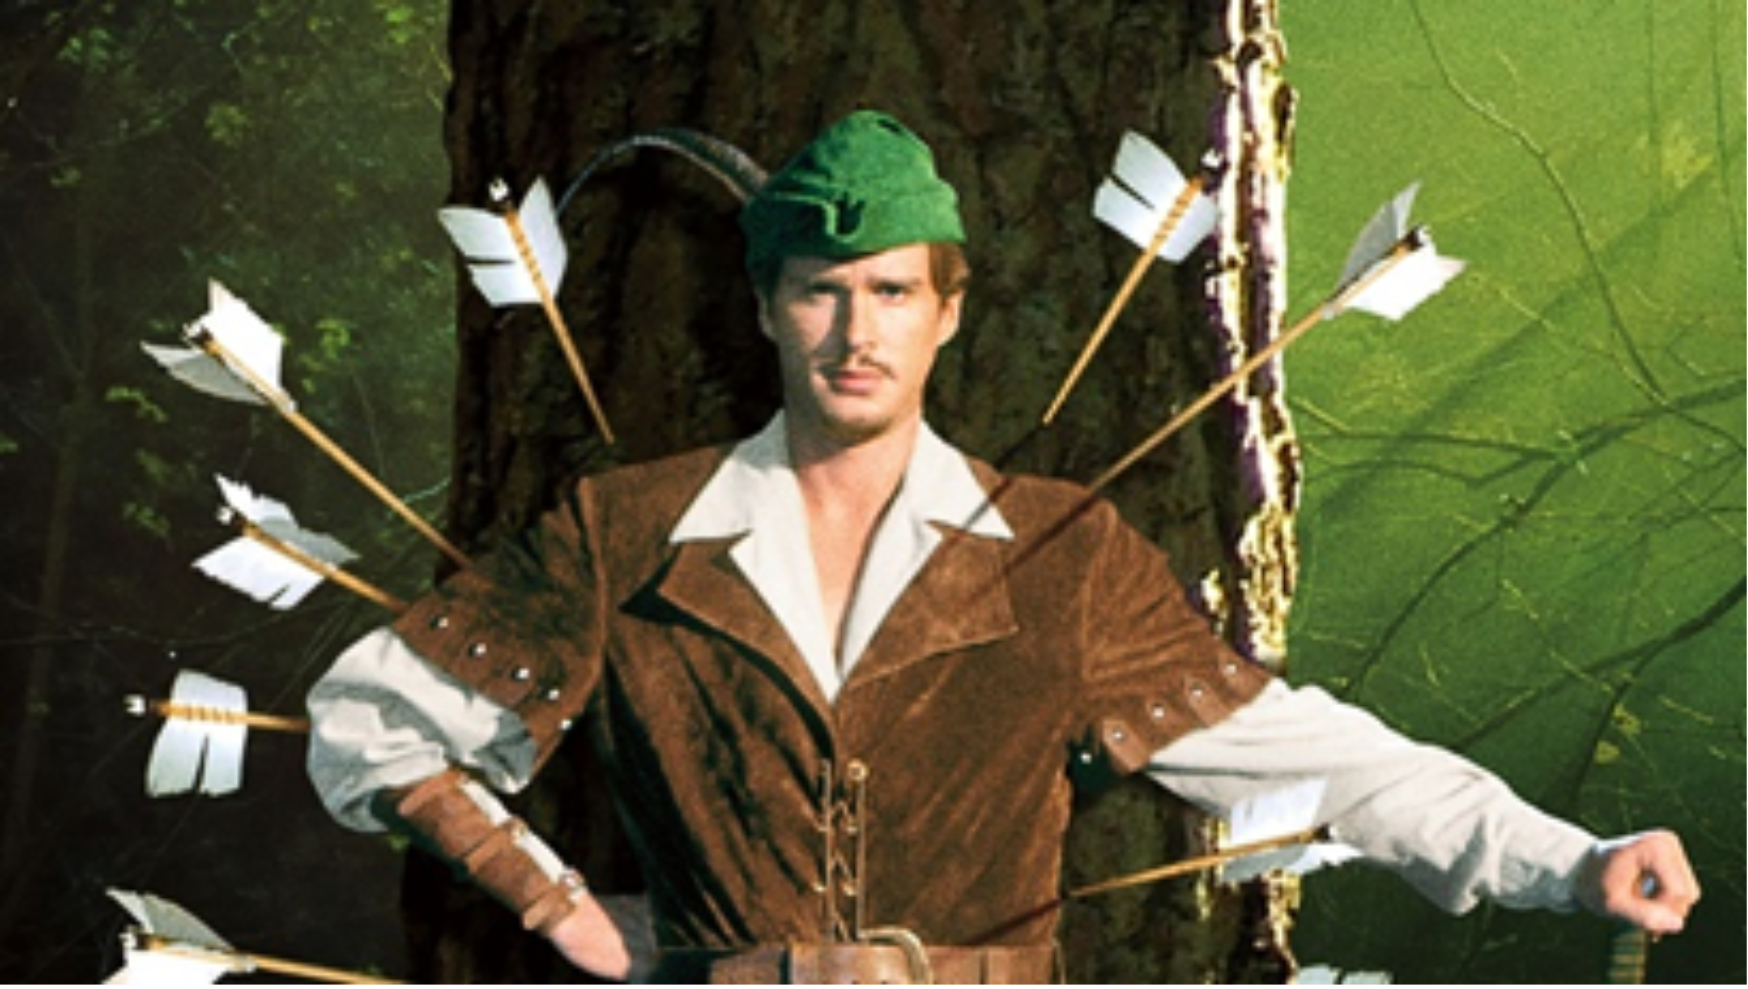 What Does Robin Hood Have To Do With Social Media?